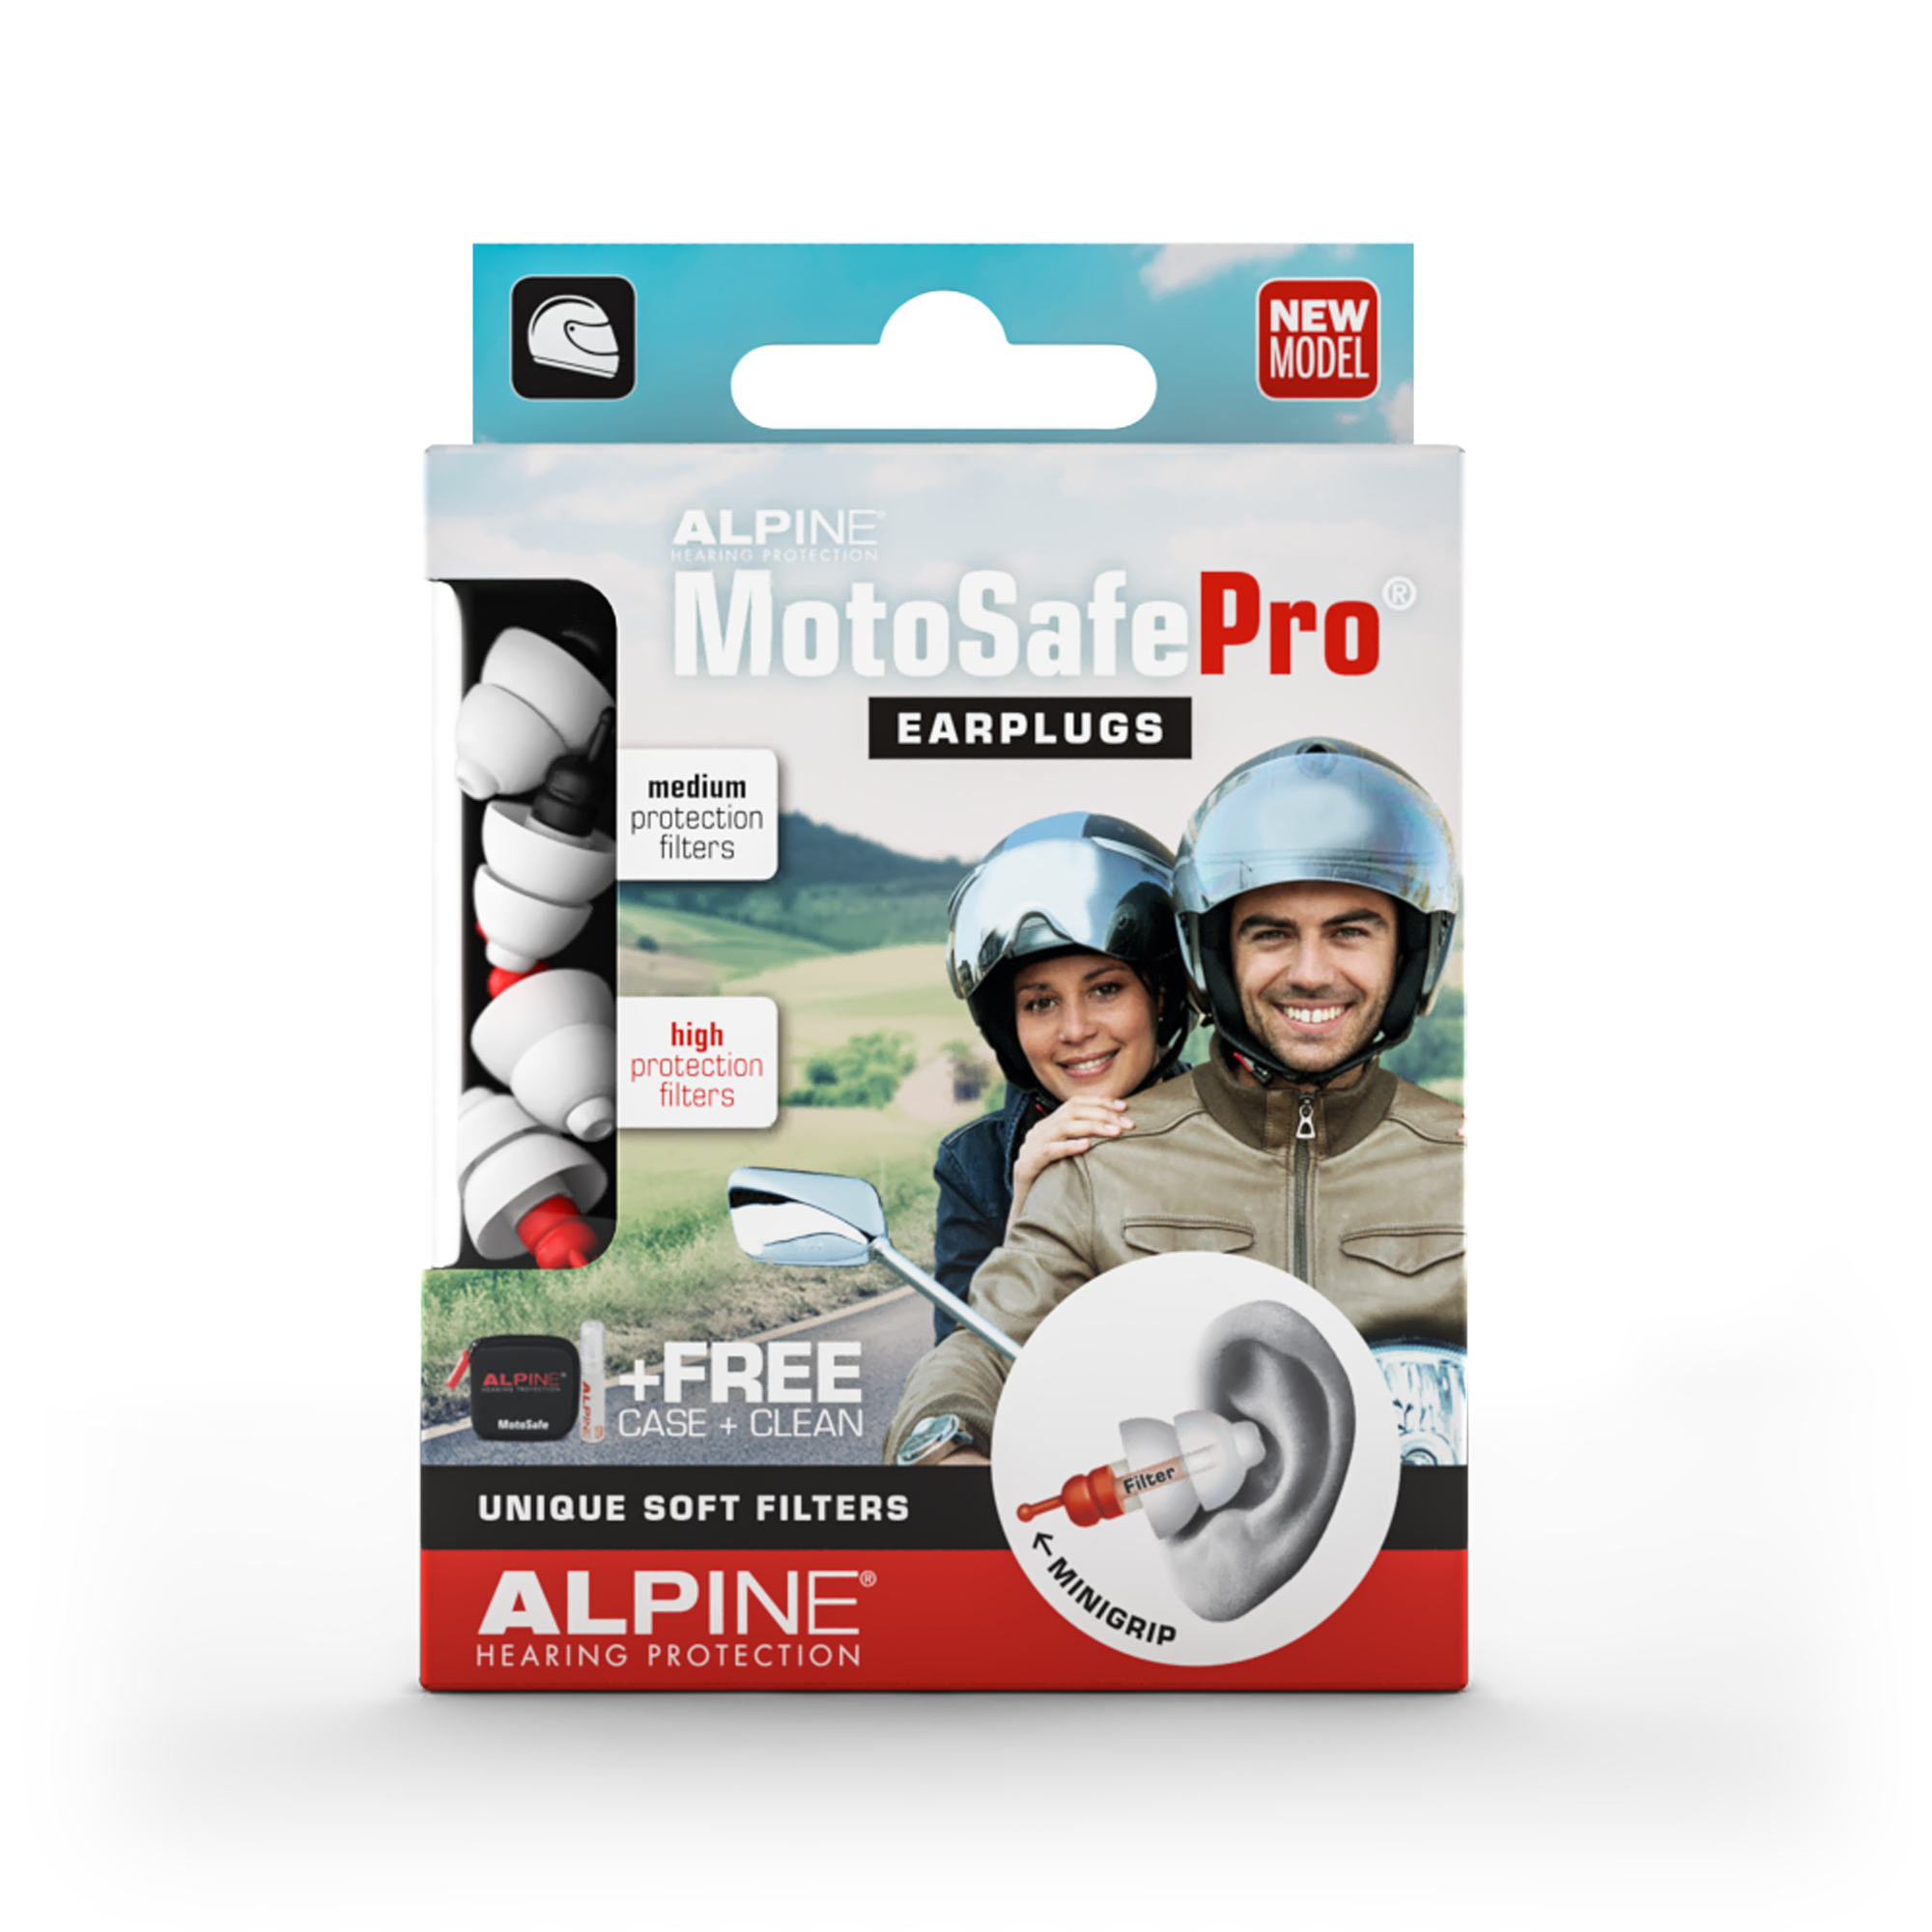 Alpine MotoSafe Pro for motorcyclists – Alpine Hearing Protection